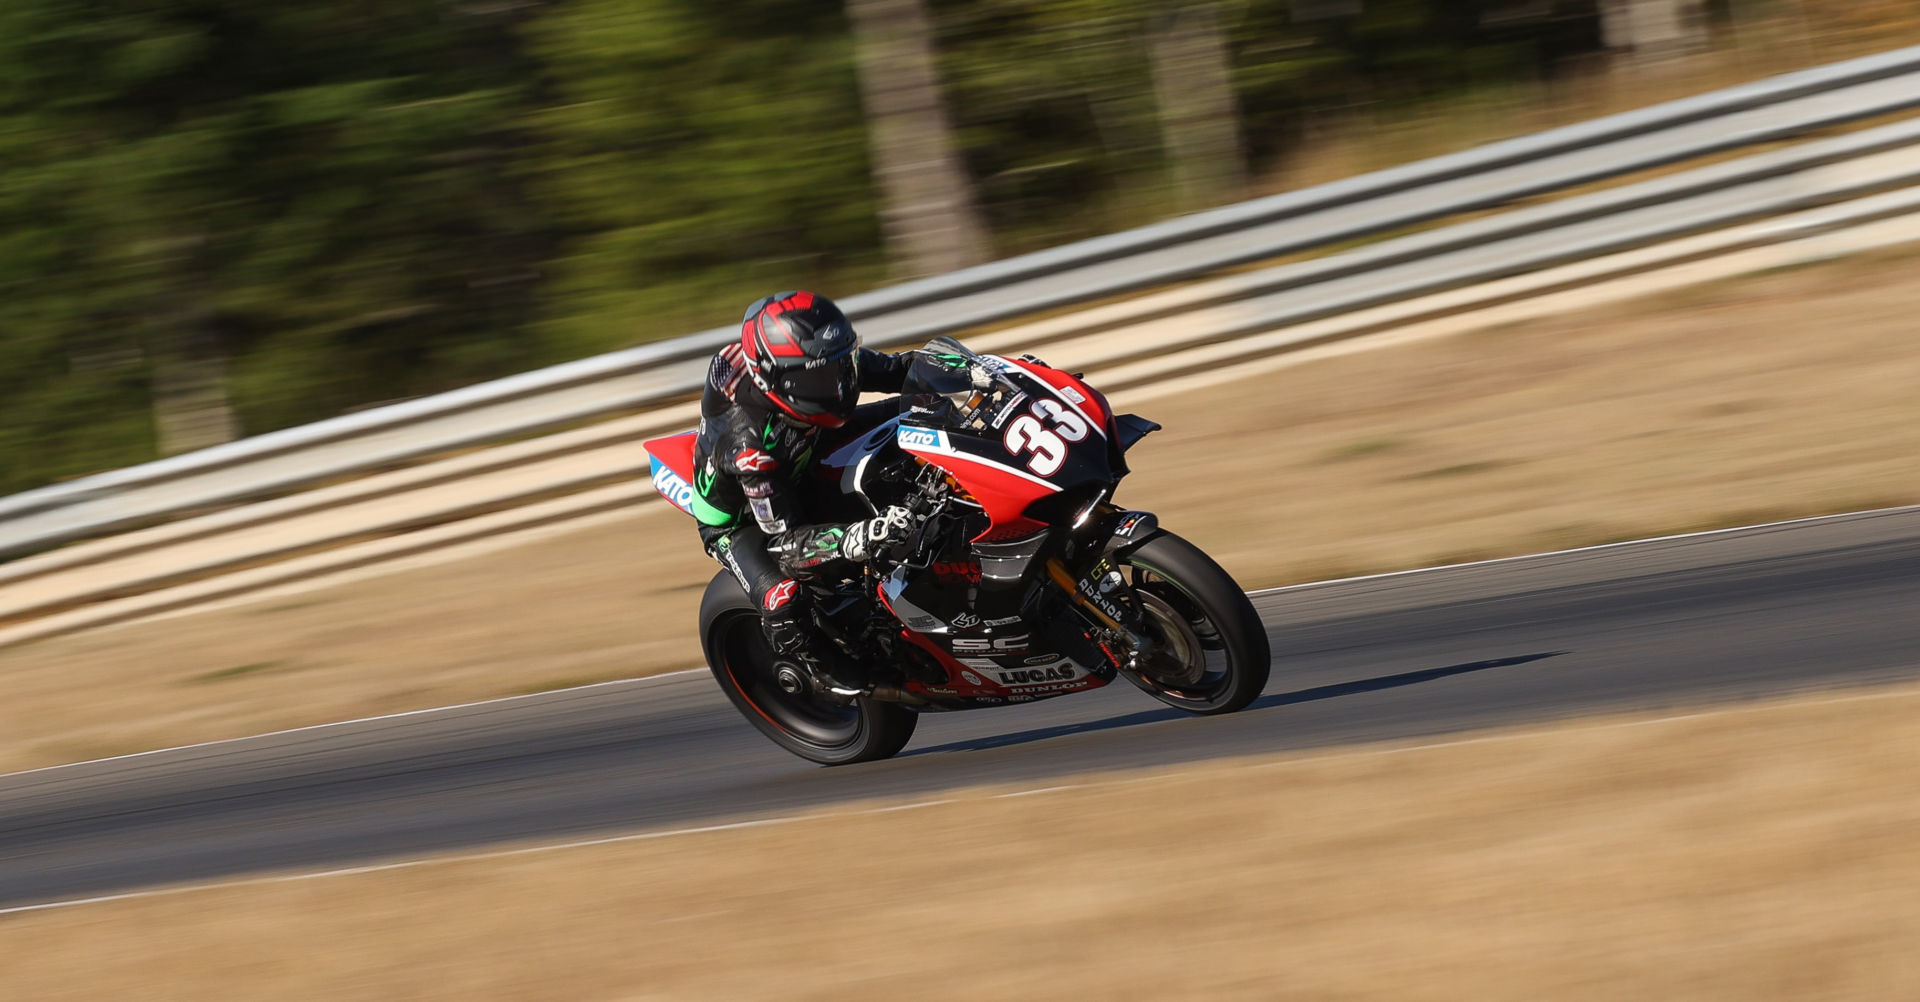 Kyle Wyman (33) during one of his few laps at Ridge Motorsports Park. Photo by Brian J. Nelson.